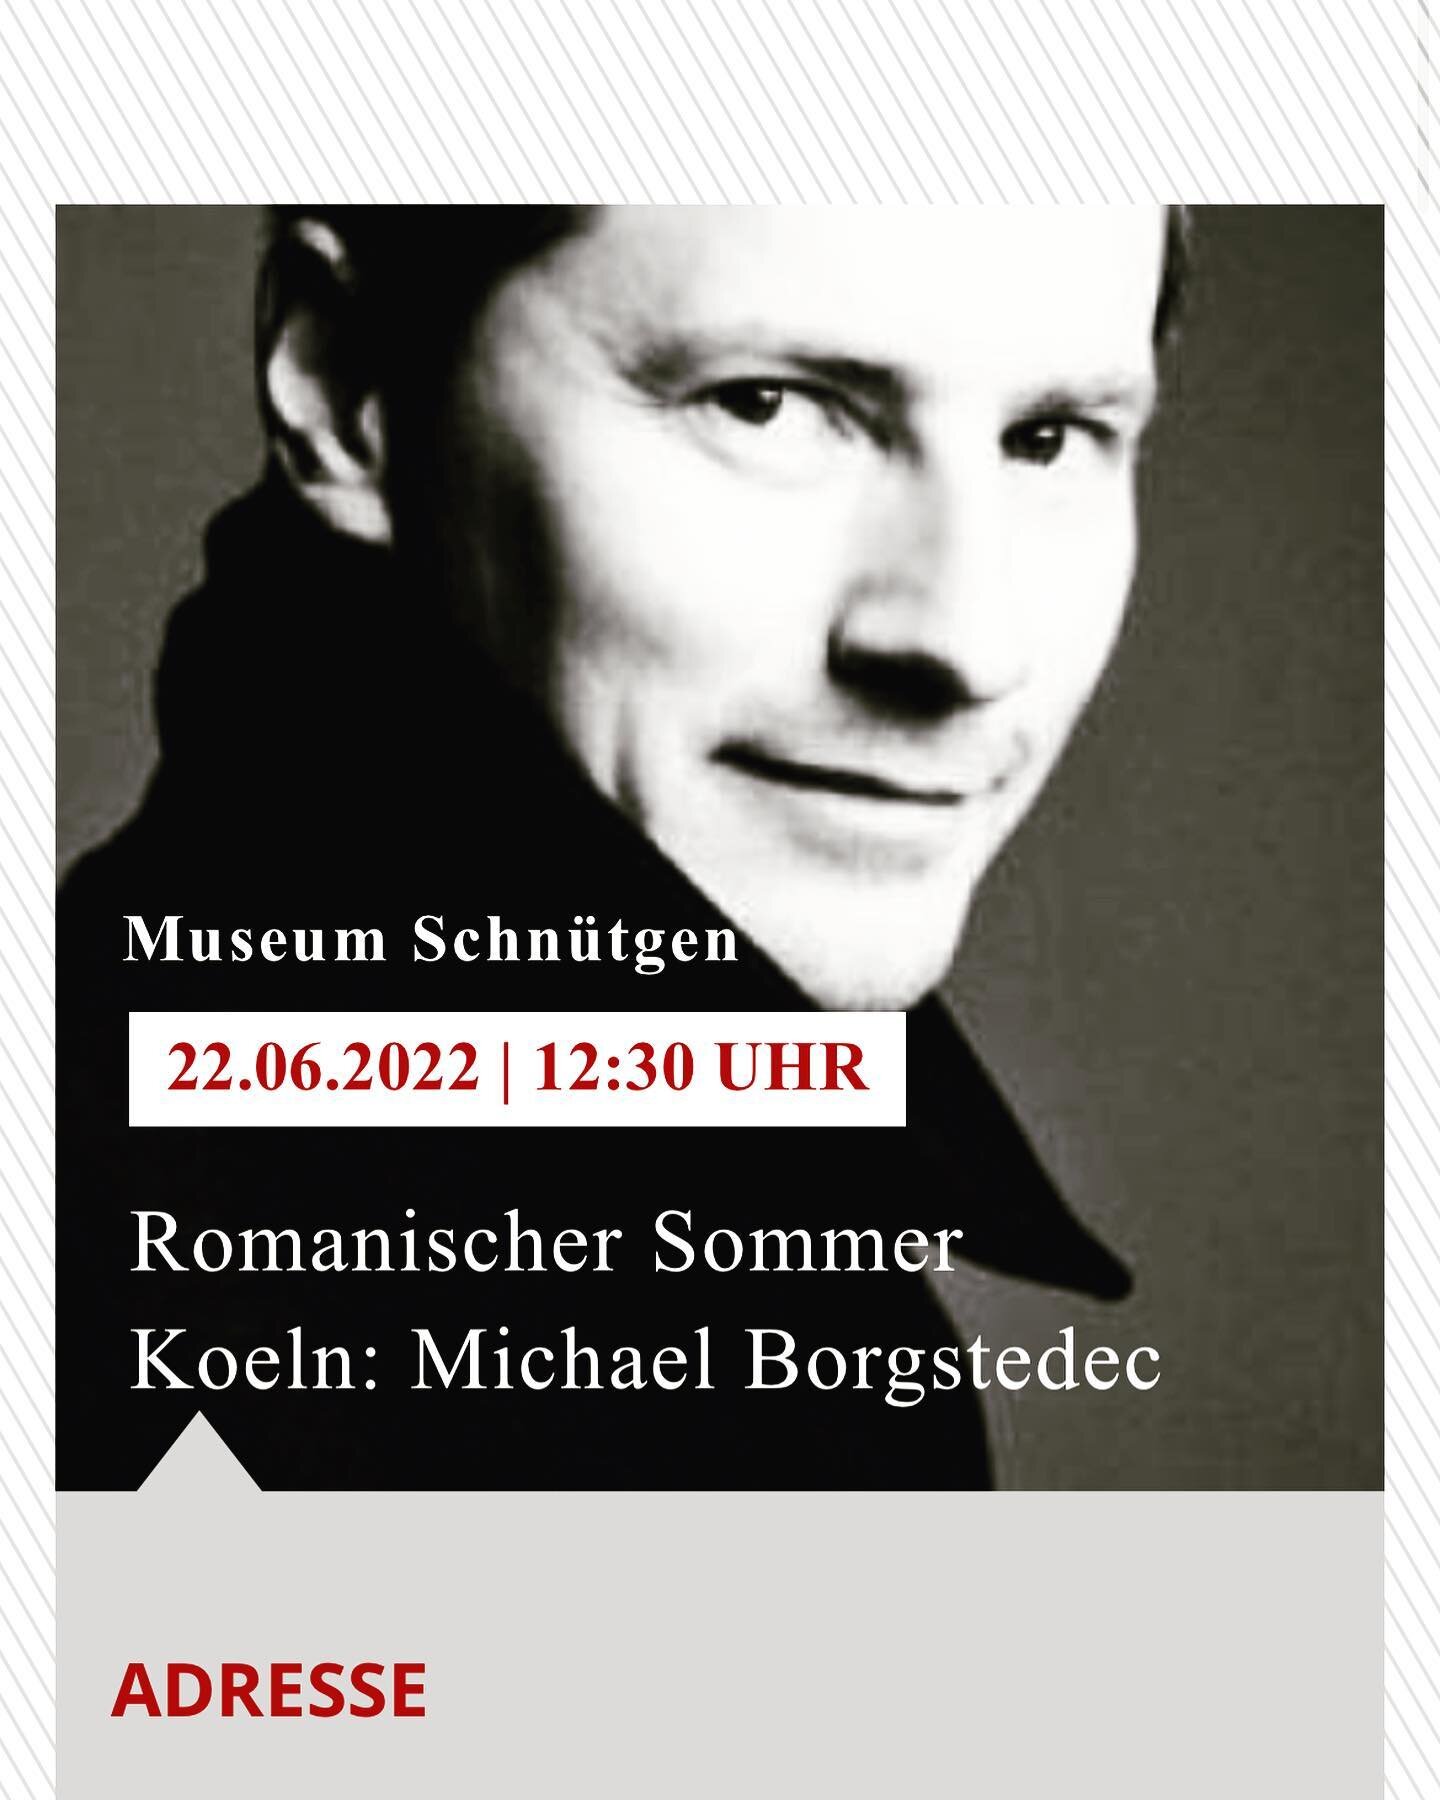 A bit short notice - but just in case someone is free and in the mood for some #froberger , #couperin and #bach. Today at 12:30, #museumschn&uuml;tgen #koeln #cembalo #harpsichord #romanischersommer #wdr